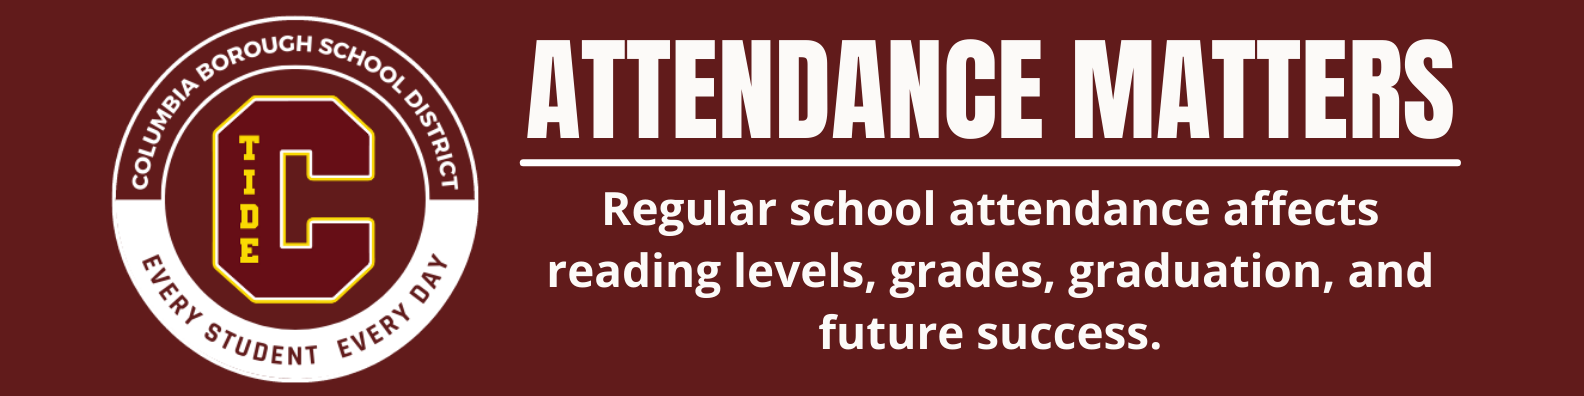 Attendance Matters- Regular school attendance affects reading levels, grades, graduation, and future success with district logo click for pdf